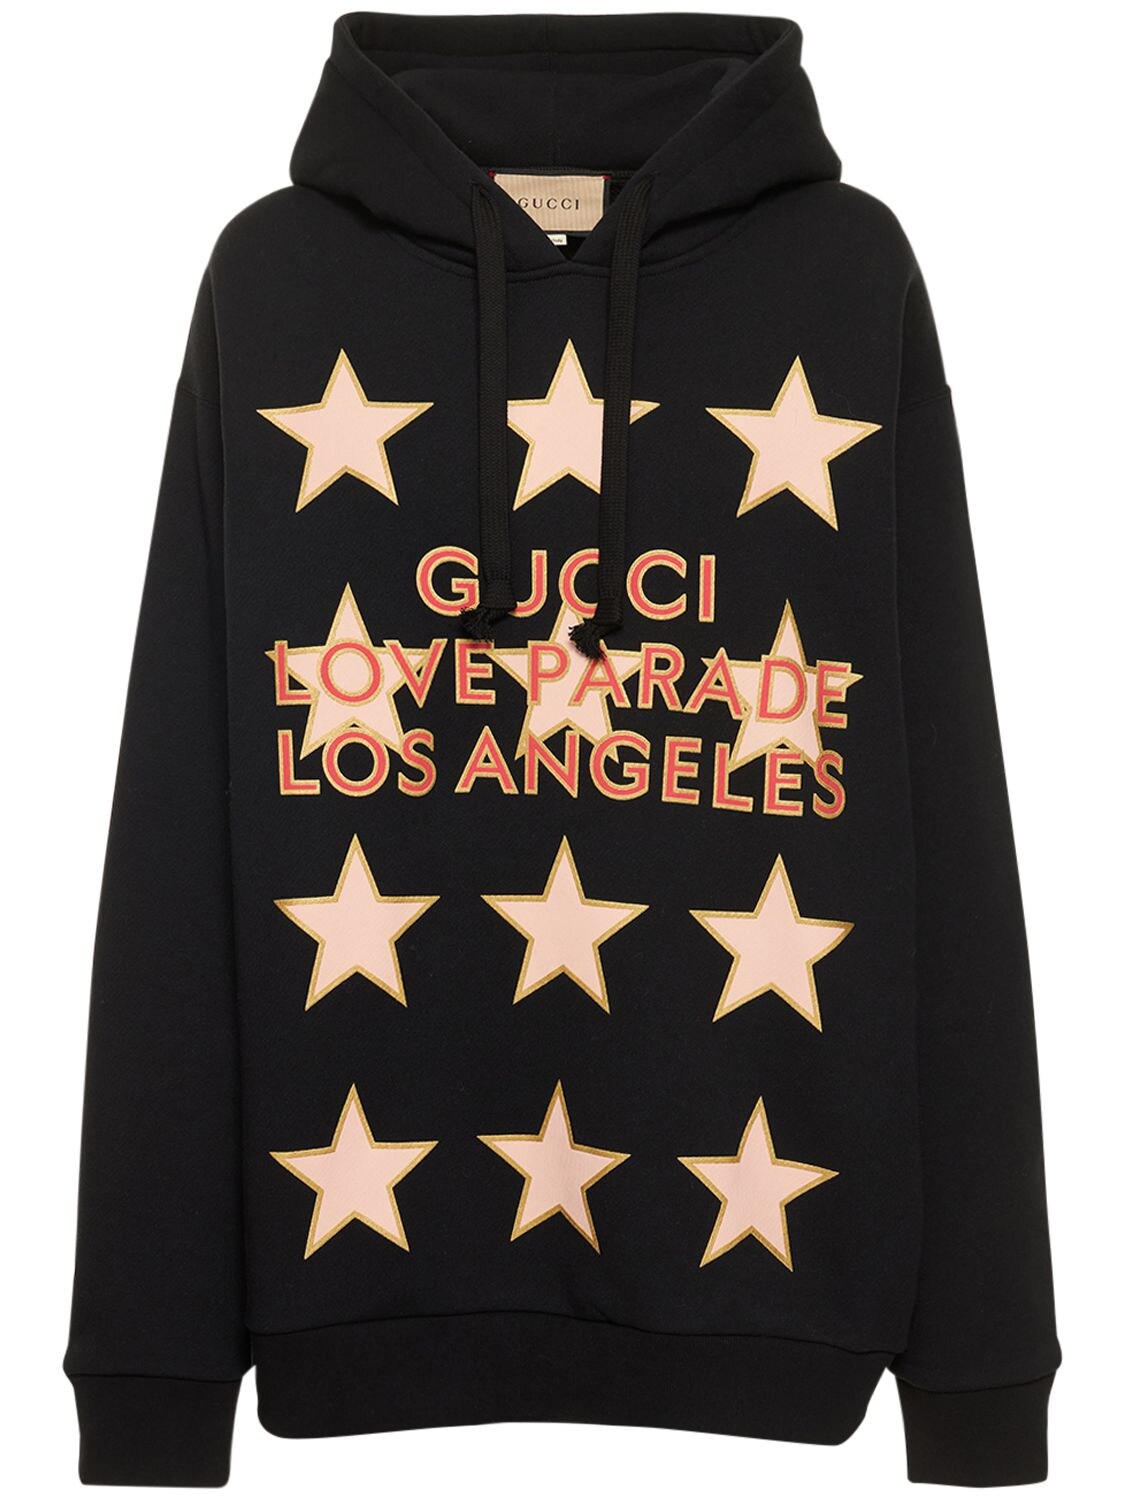 GUCCI OVERSIZE PRINTED COTTON JERSEY HOODIE